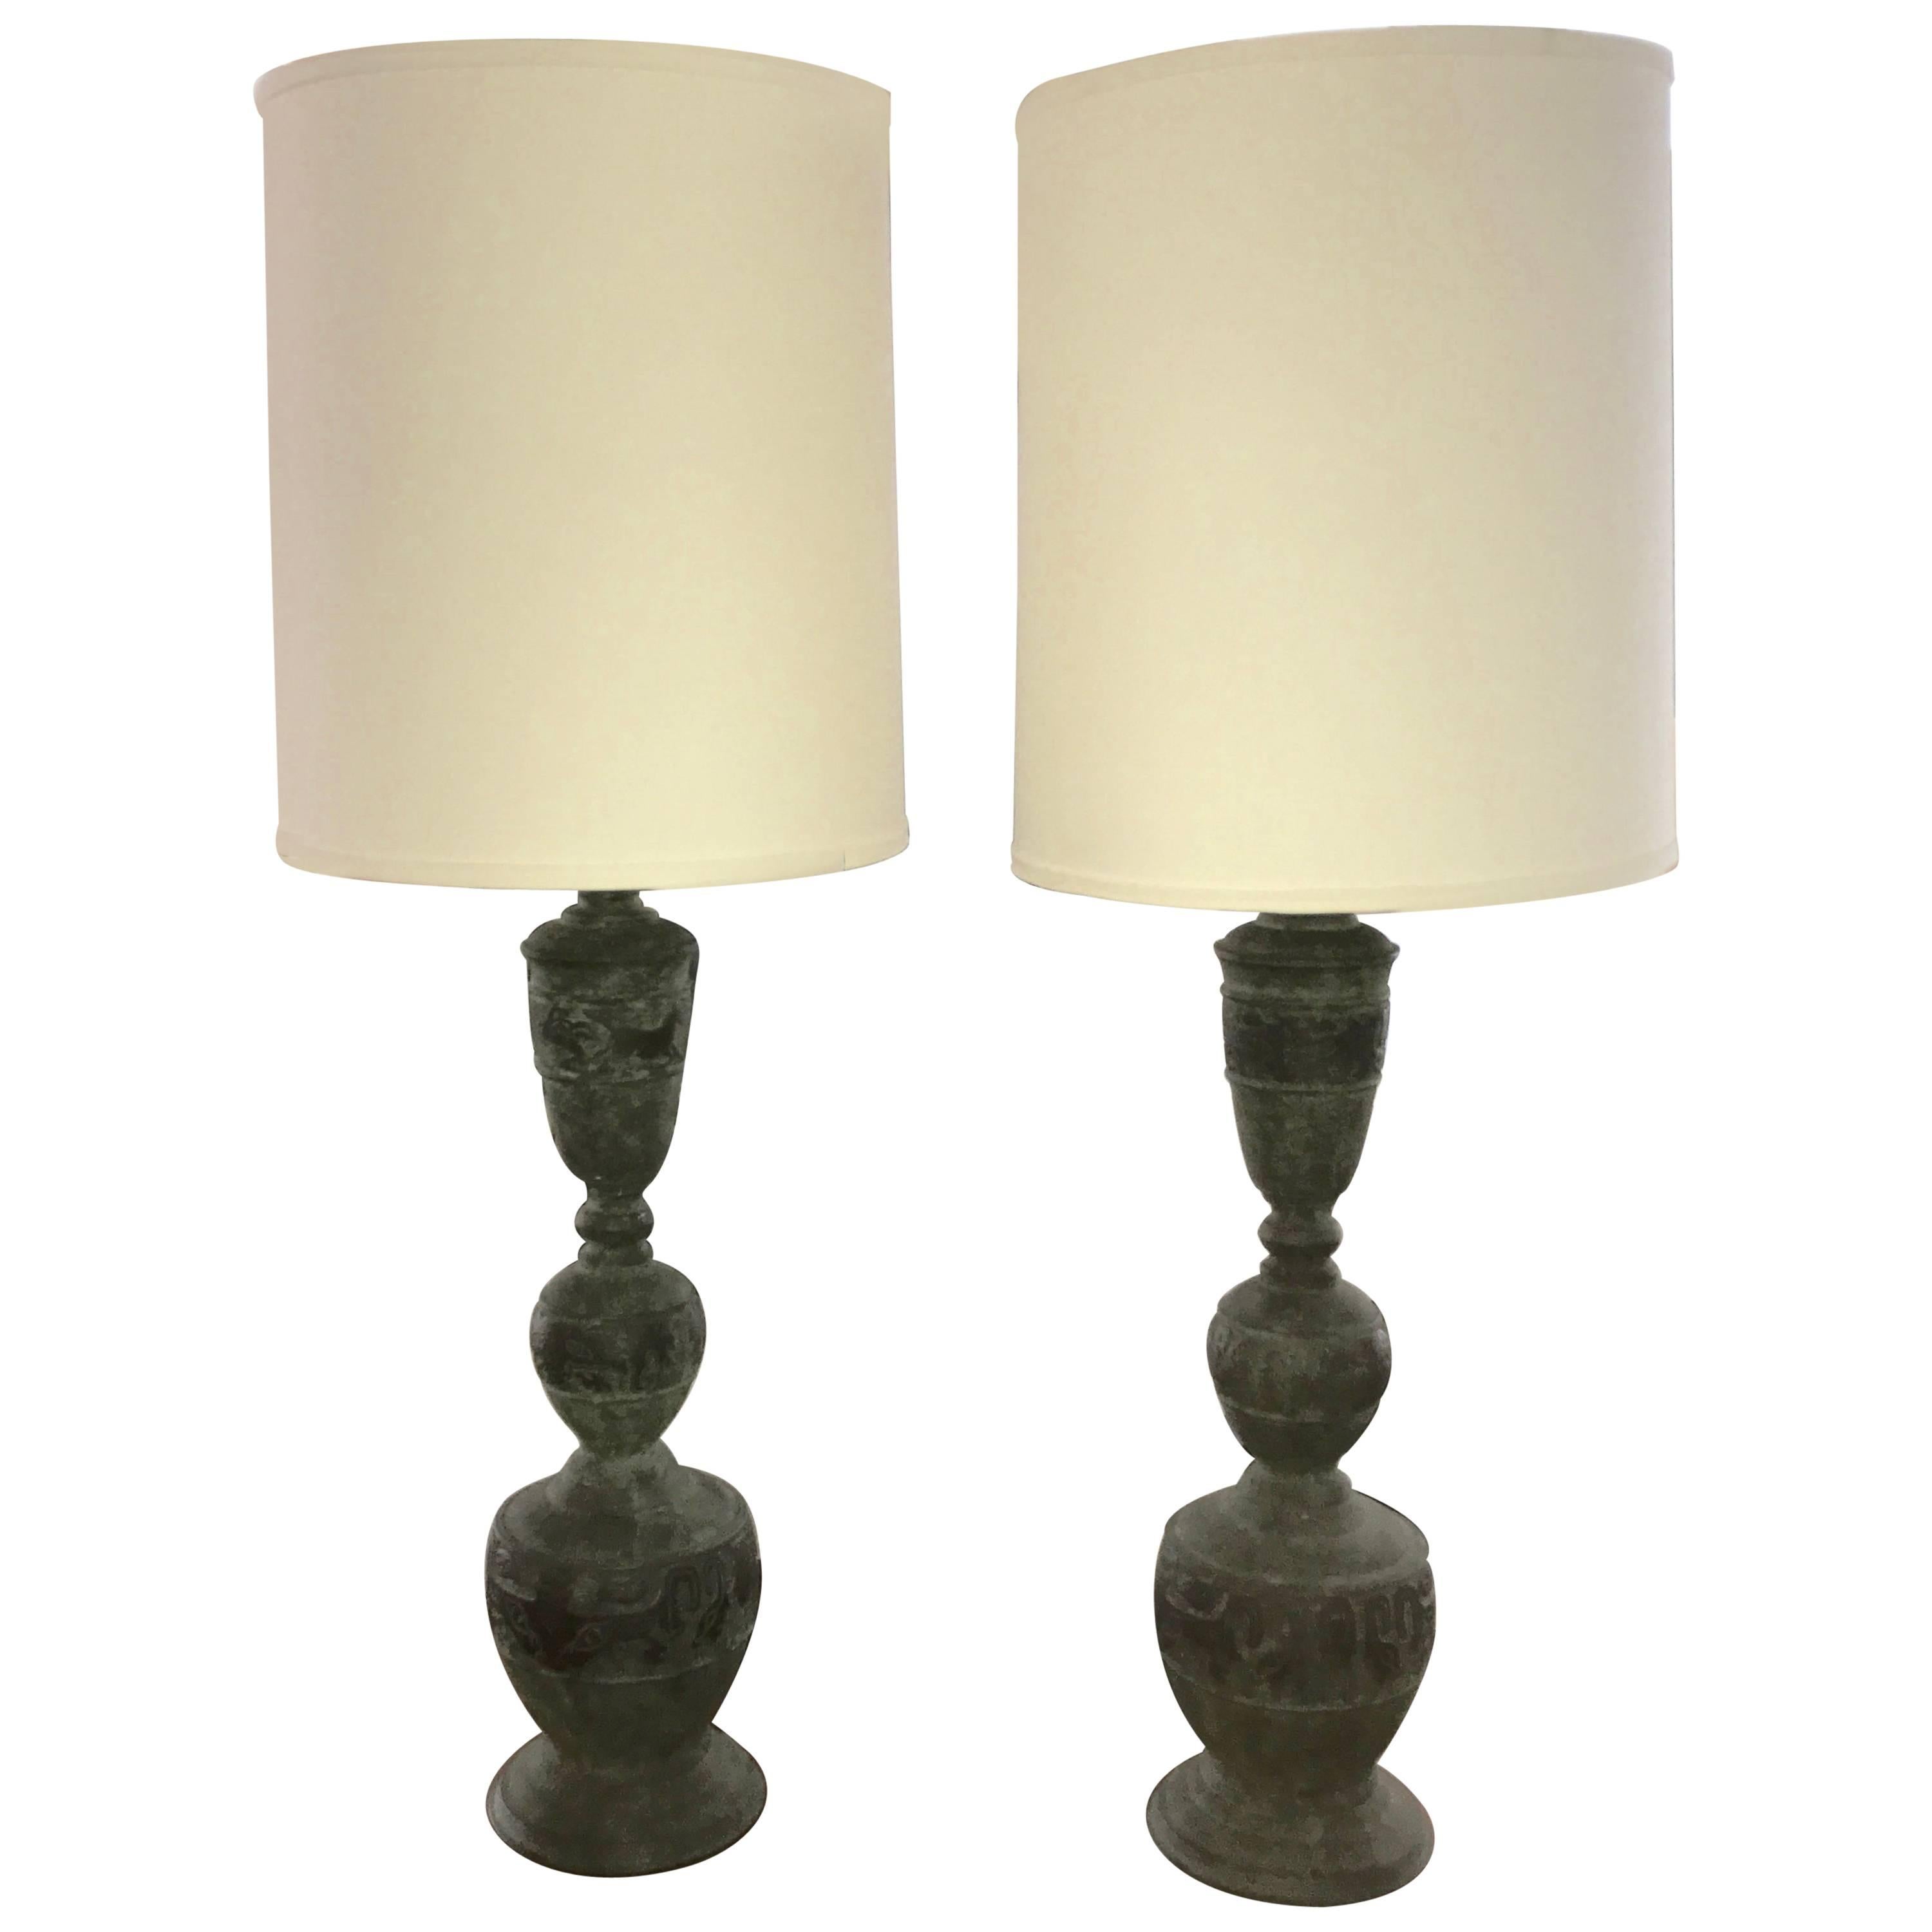 Pair of Chinese Motif Metal Lamps with Great Patination